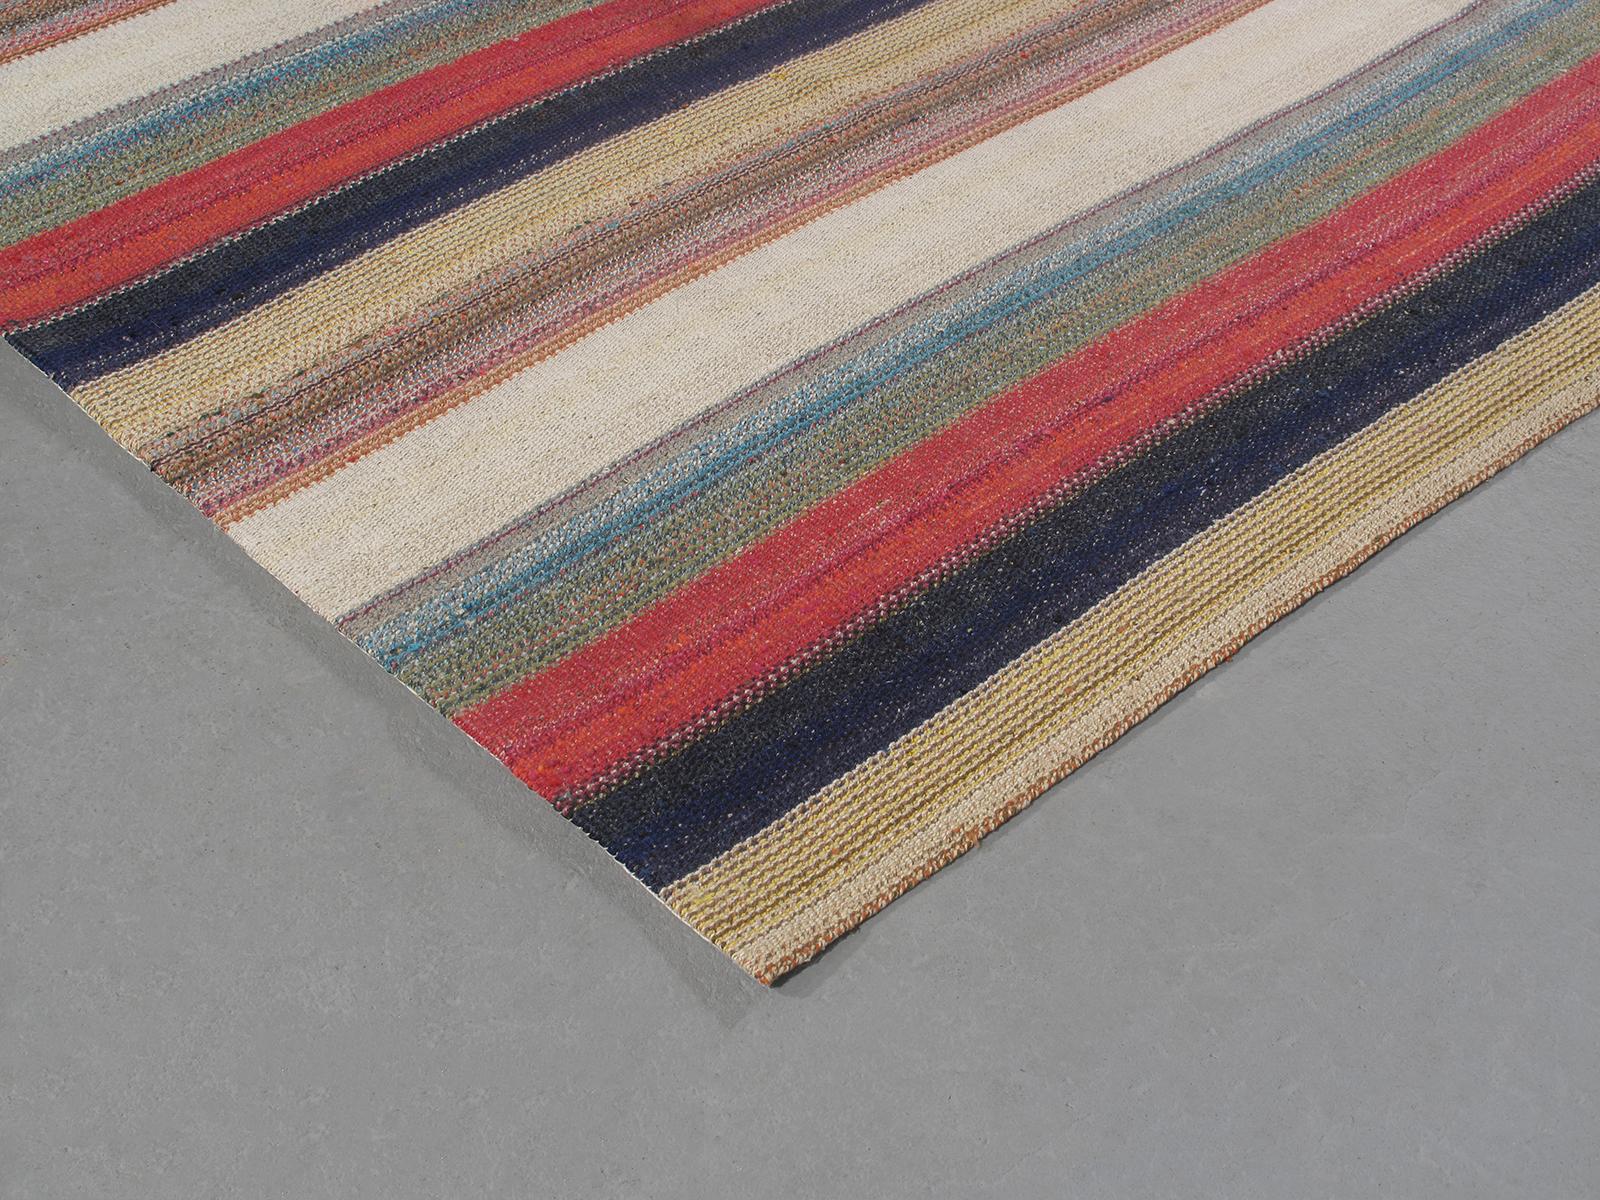 Vintage Mid-Century Modern Minimalist Persian Stripe Flat-Weave Rug In Excellent Condition For Sale In New York, NY